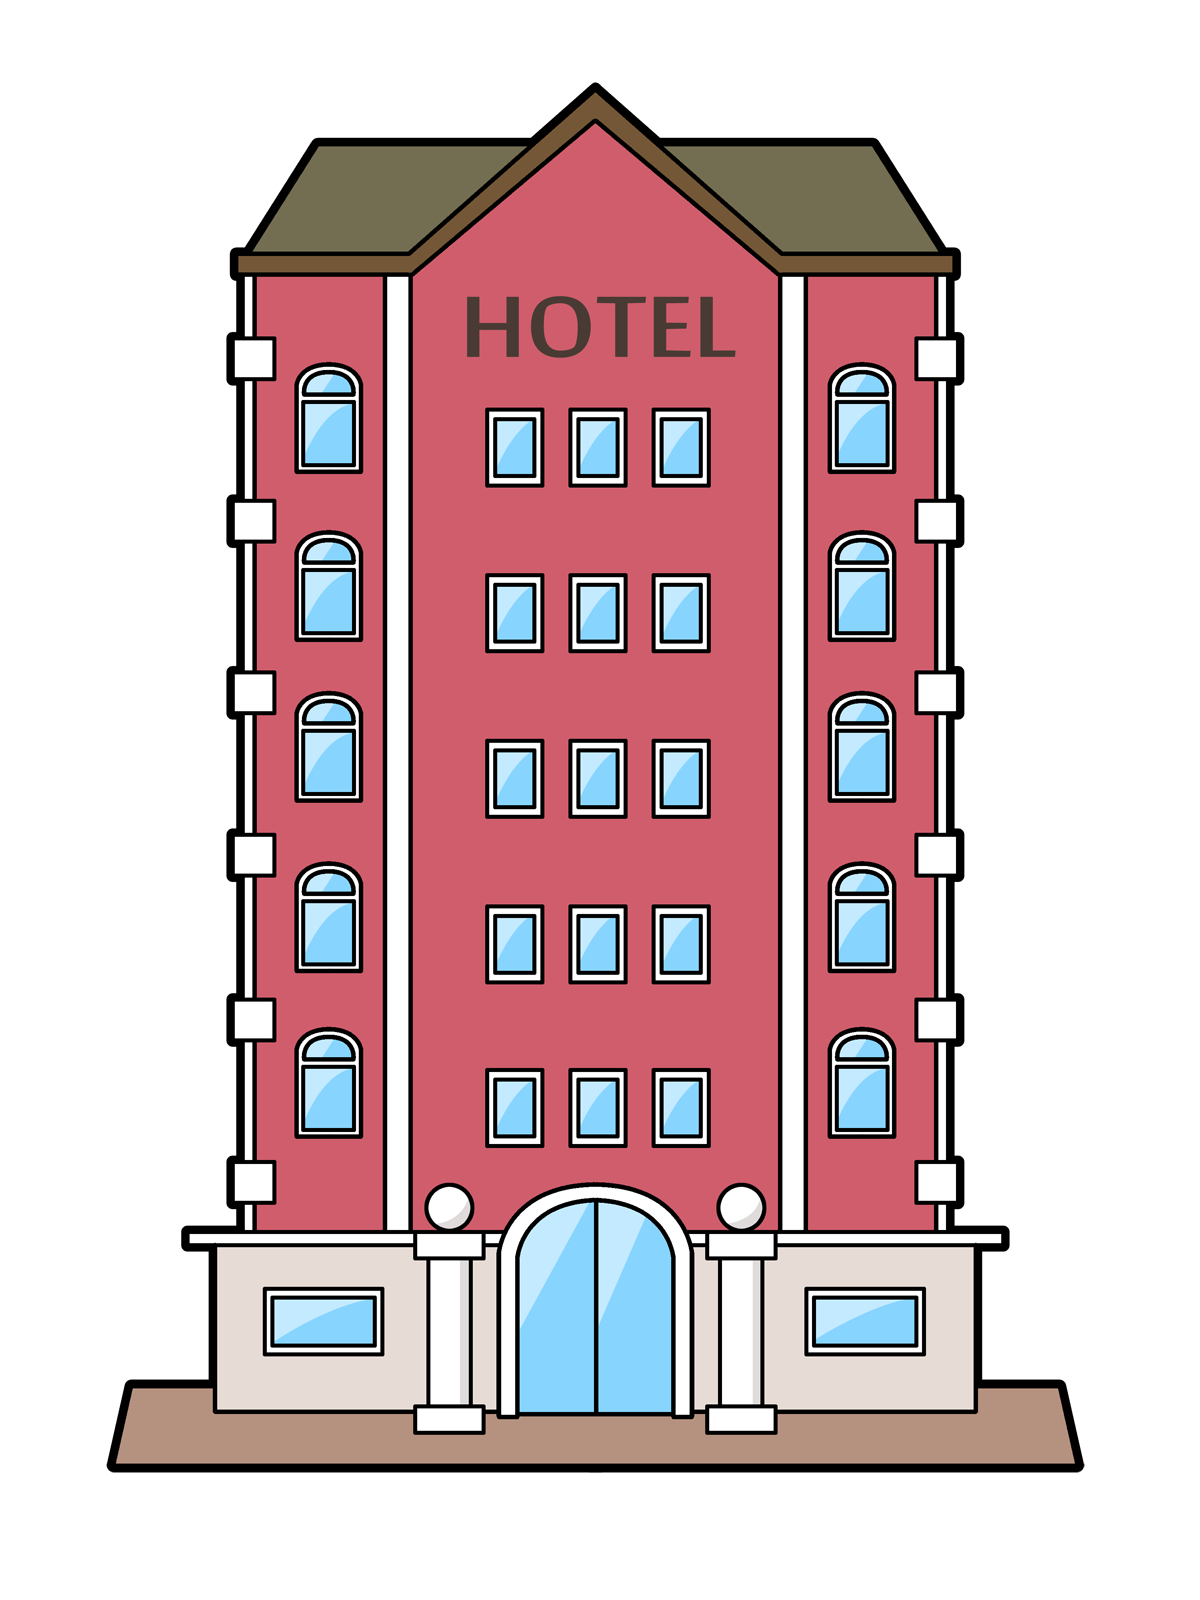 Hotel Clip Art   Images   Free For Commercial Use